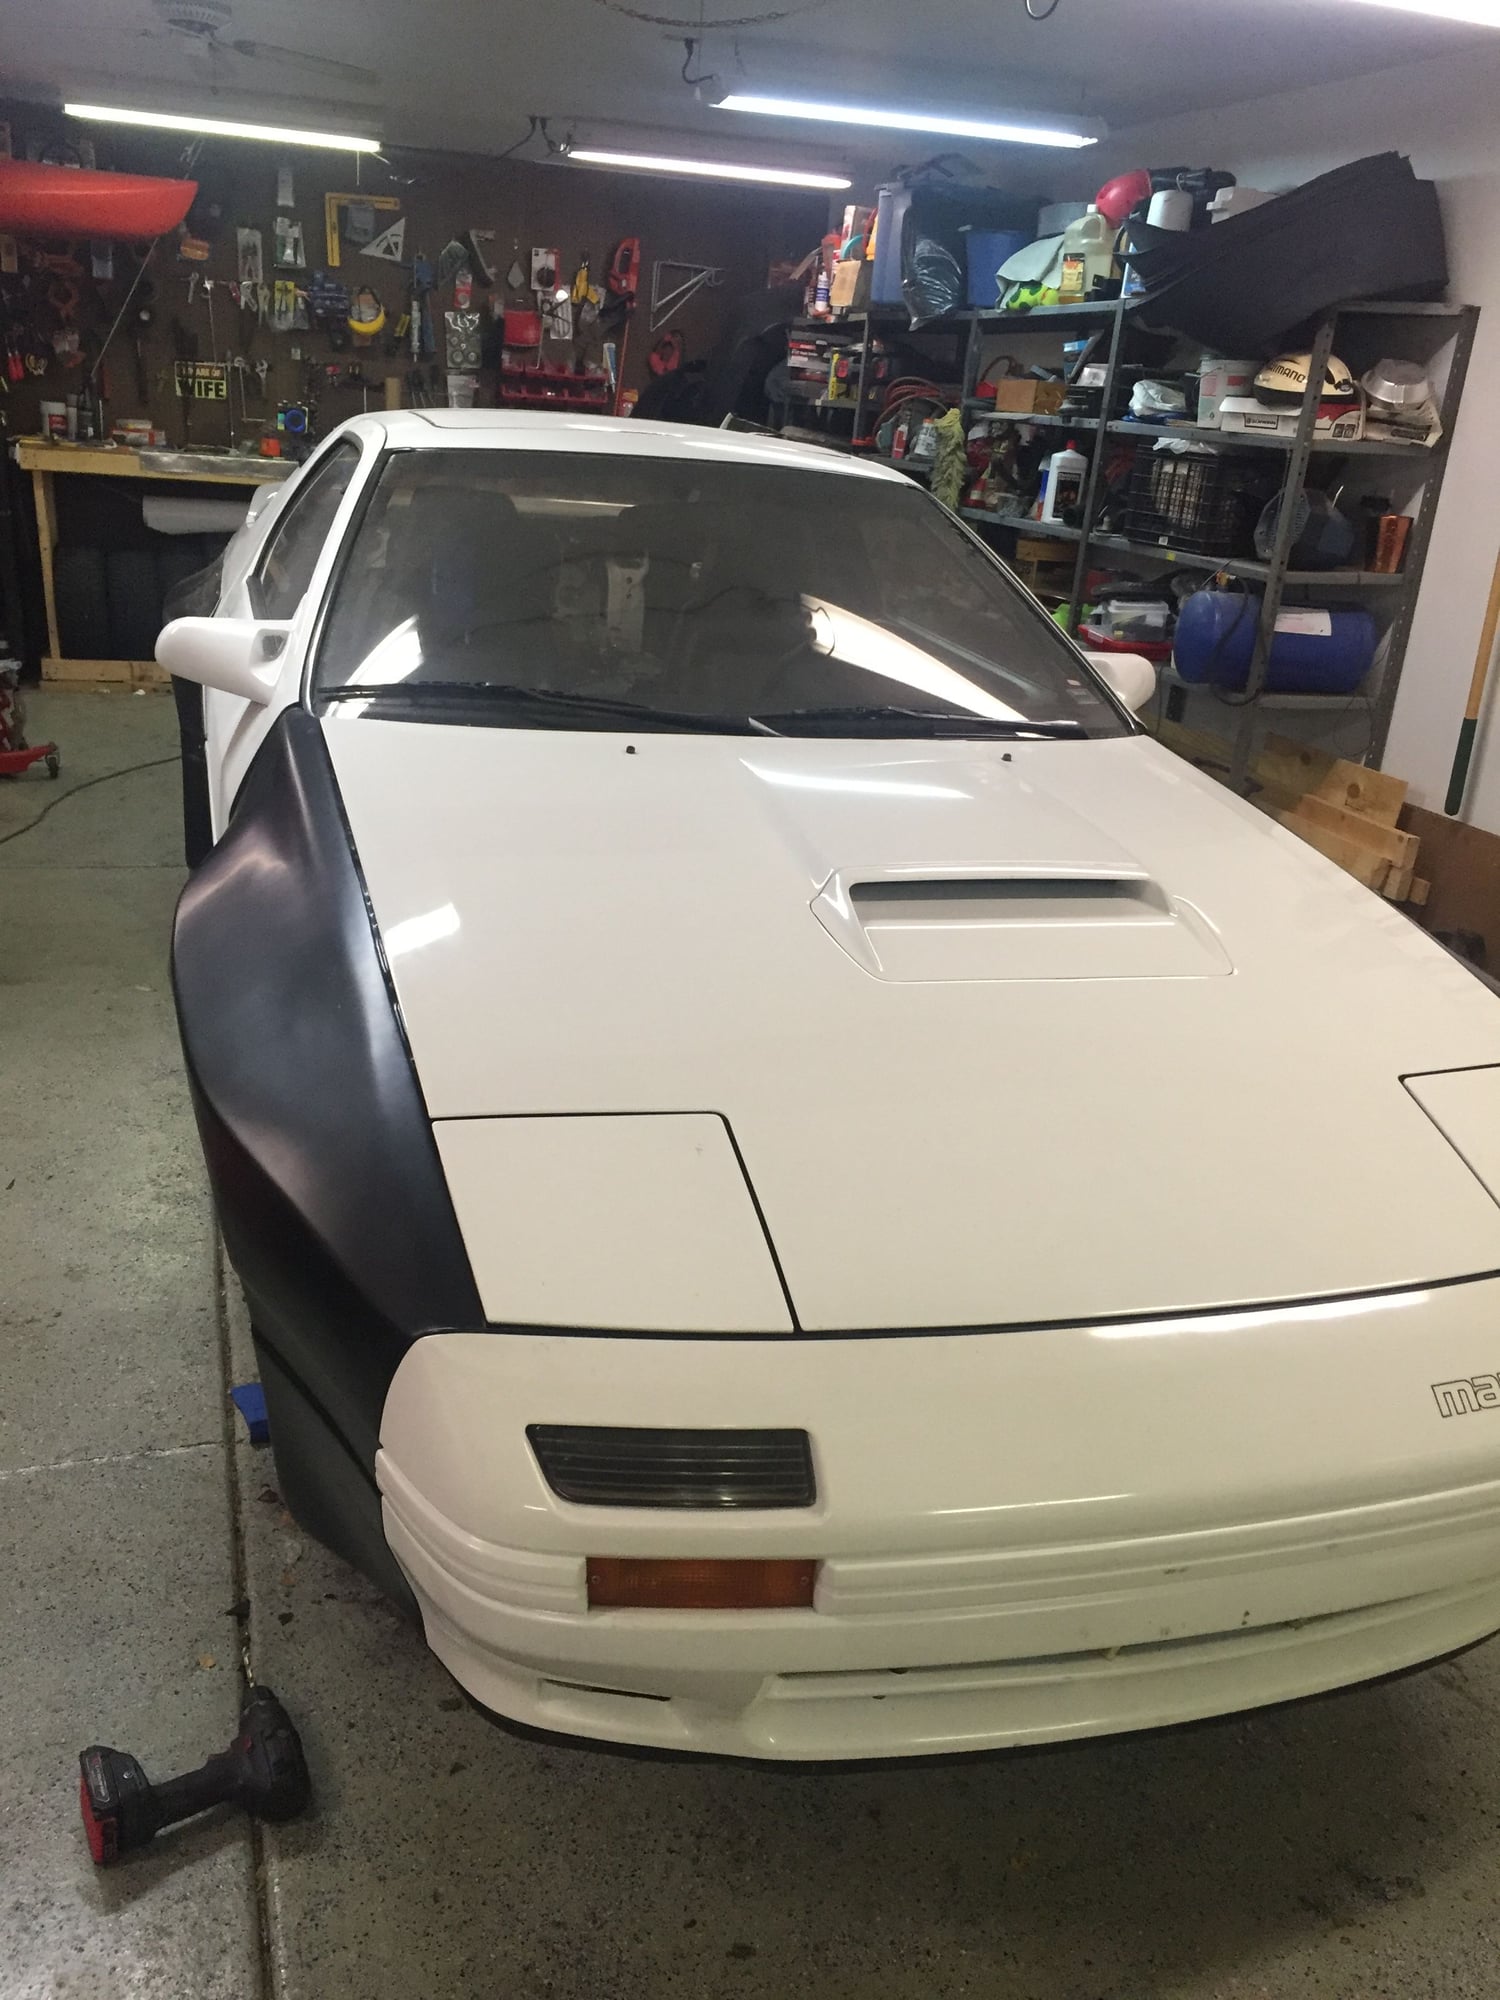 1988 Mazda RX-7 - For Sale 88 10AE RX7 turbo moded - Used - VIN JM1FC3326J0622443 - 106,000 Miles - Other - Manual - Hatchback - White - Shorewood, IL 60404, United States